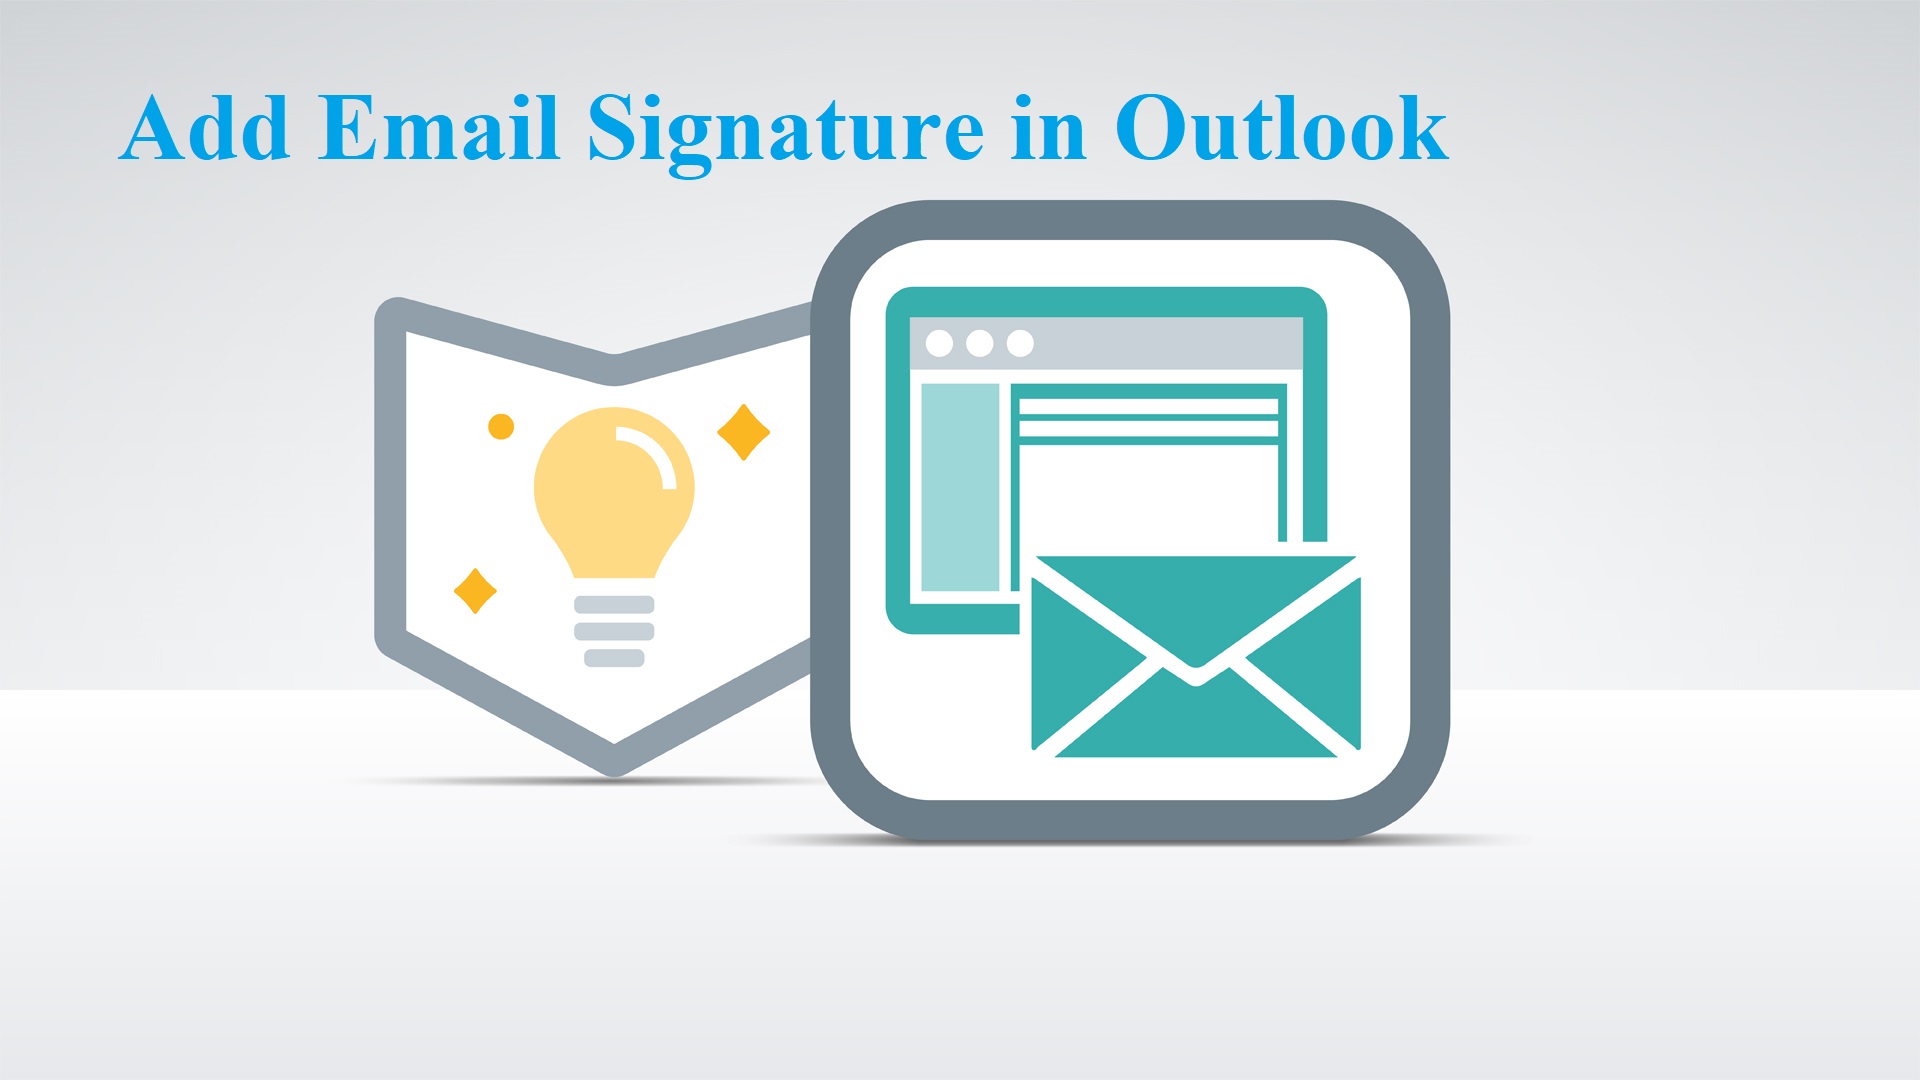 i want to add a file to an email signature in outlook